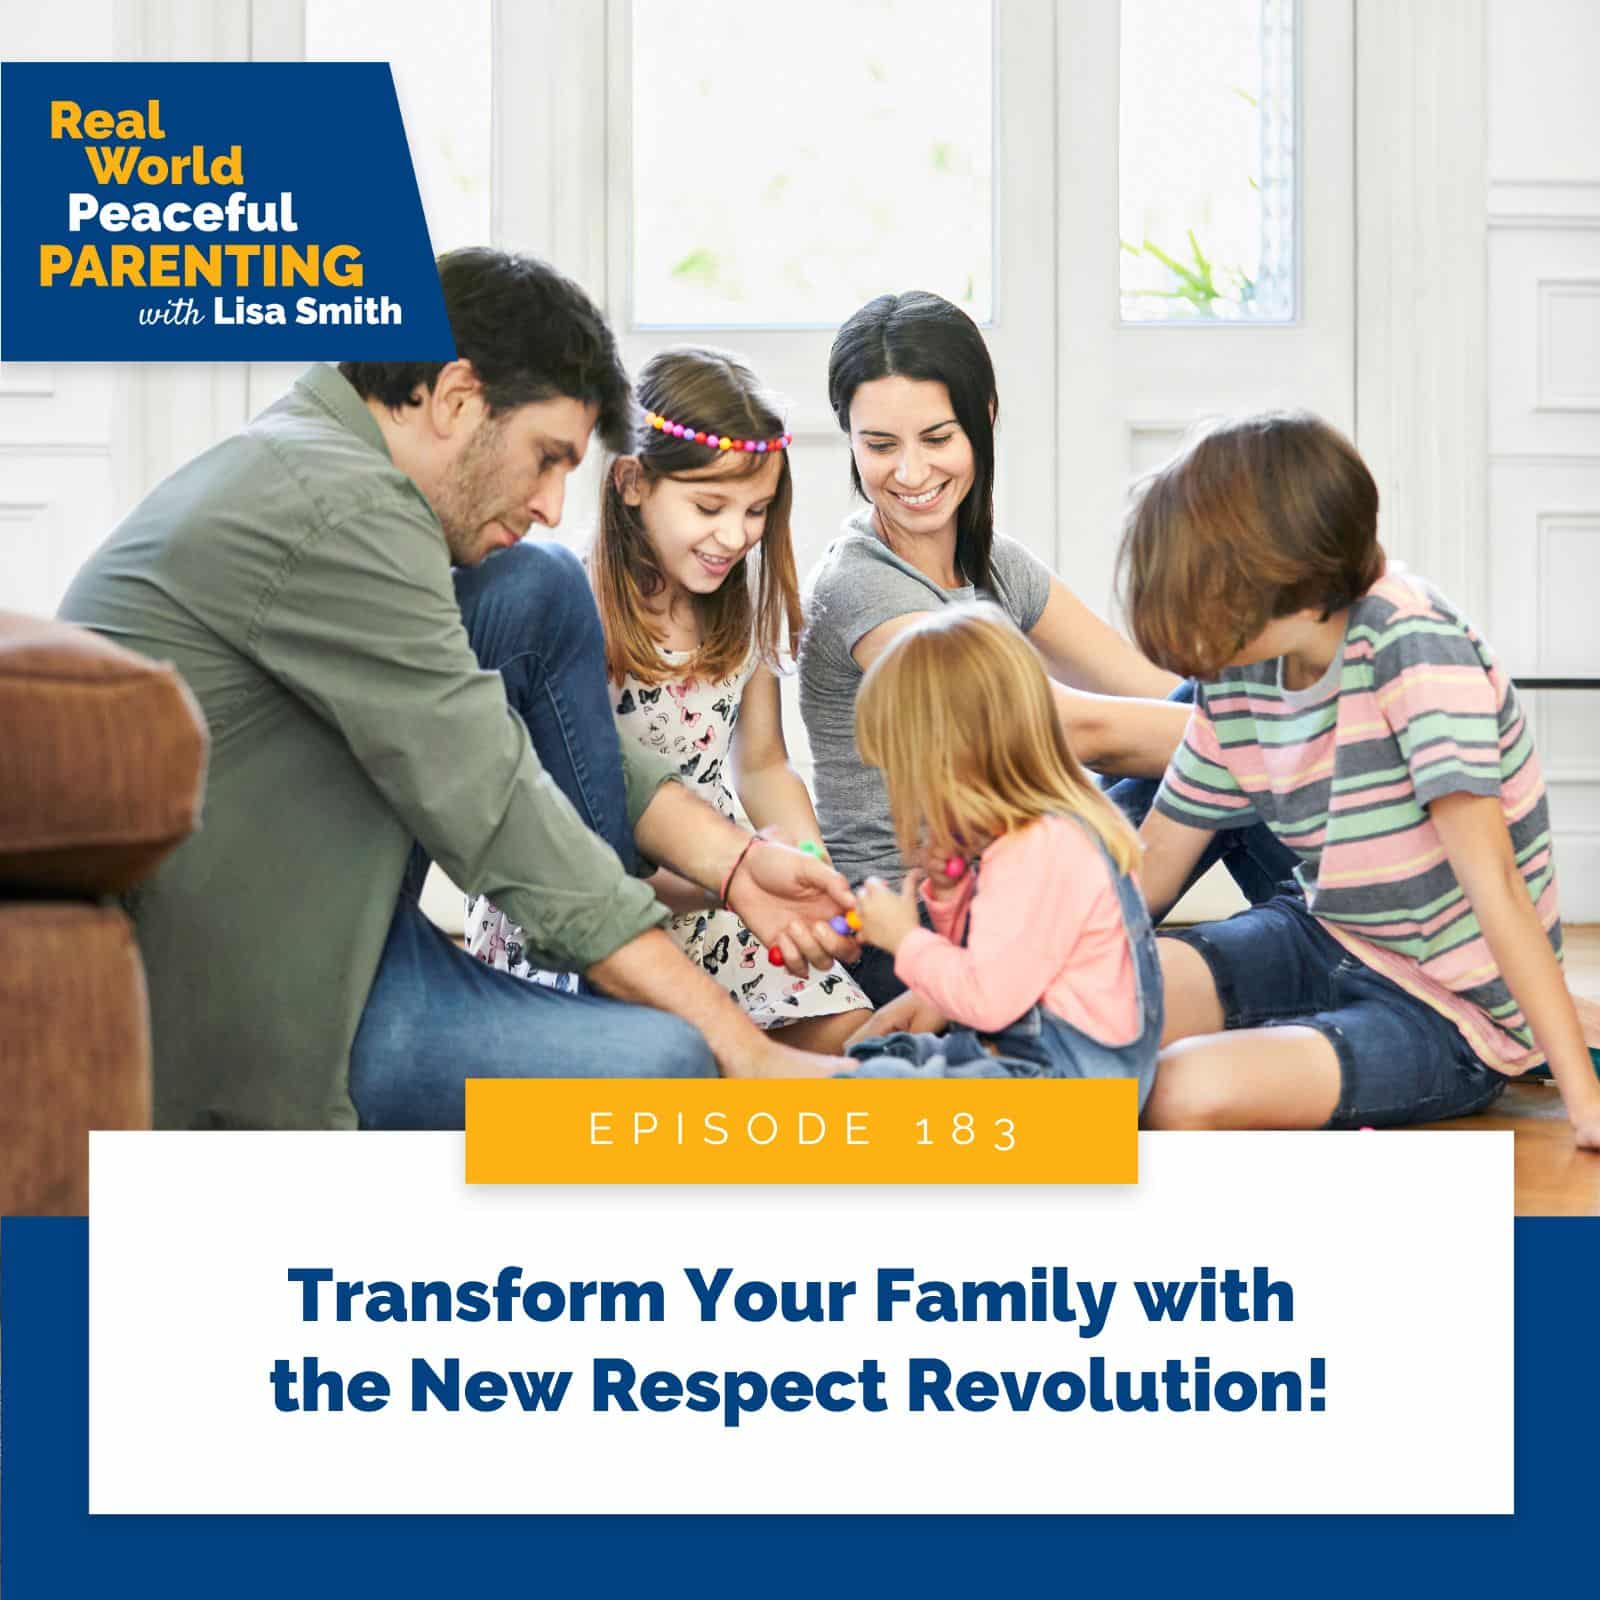 Real World Peaceful Parenting with Lisa Smith | Transform Your Family with the New Respect Revolution!